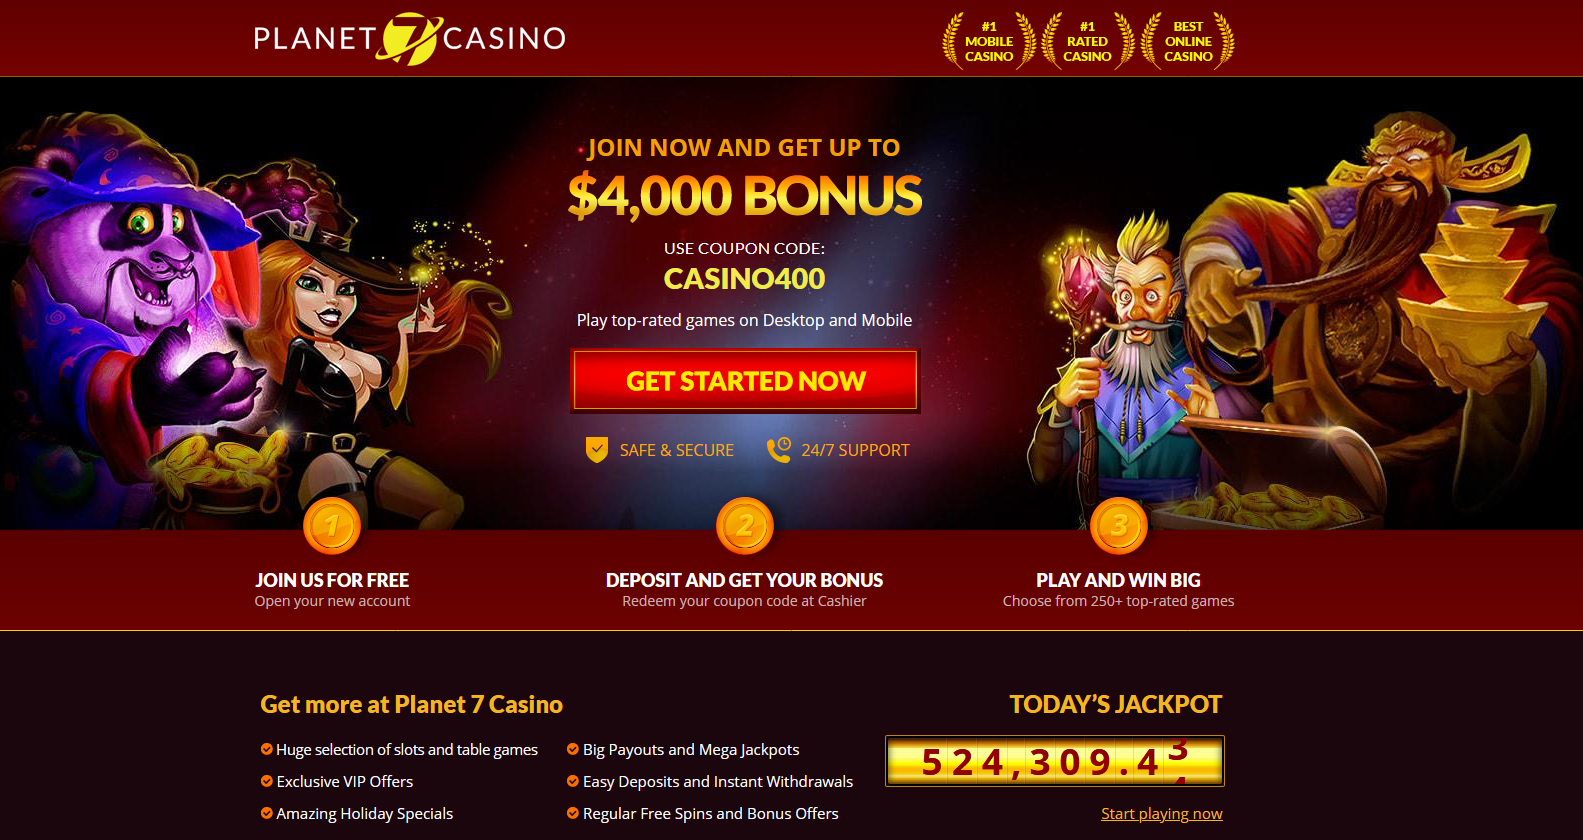 $4.000 BONUS USE COUPON CODE: CASINO400  Play top-rated games on Desktop and Mobile